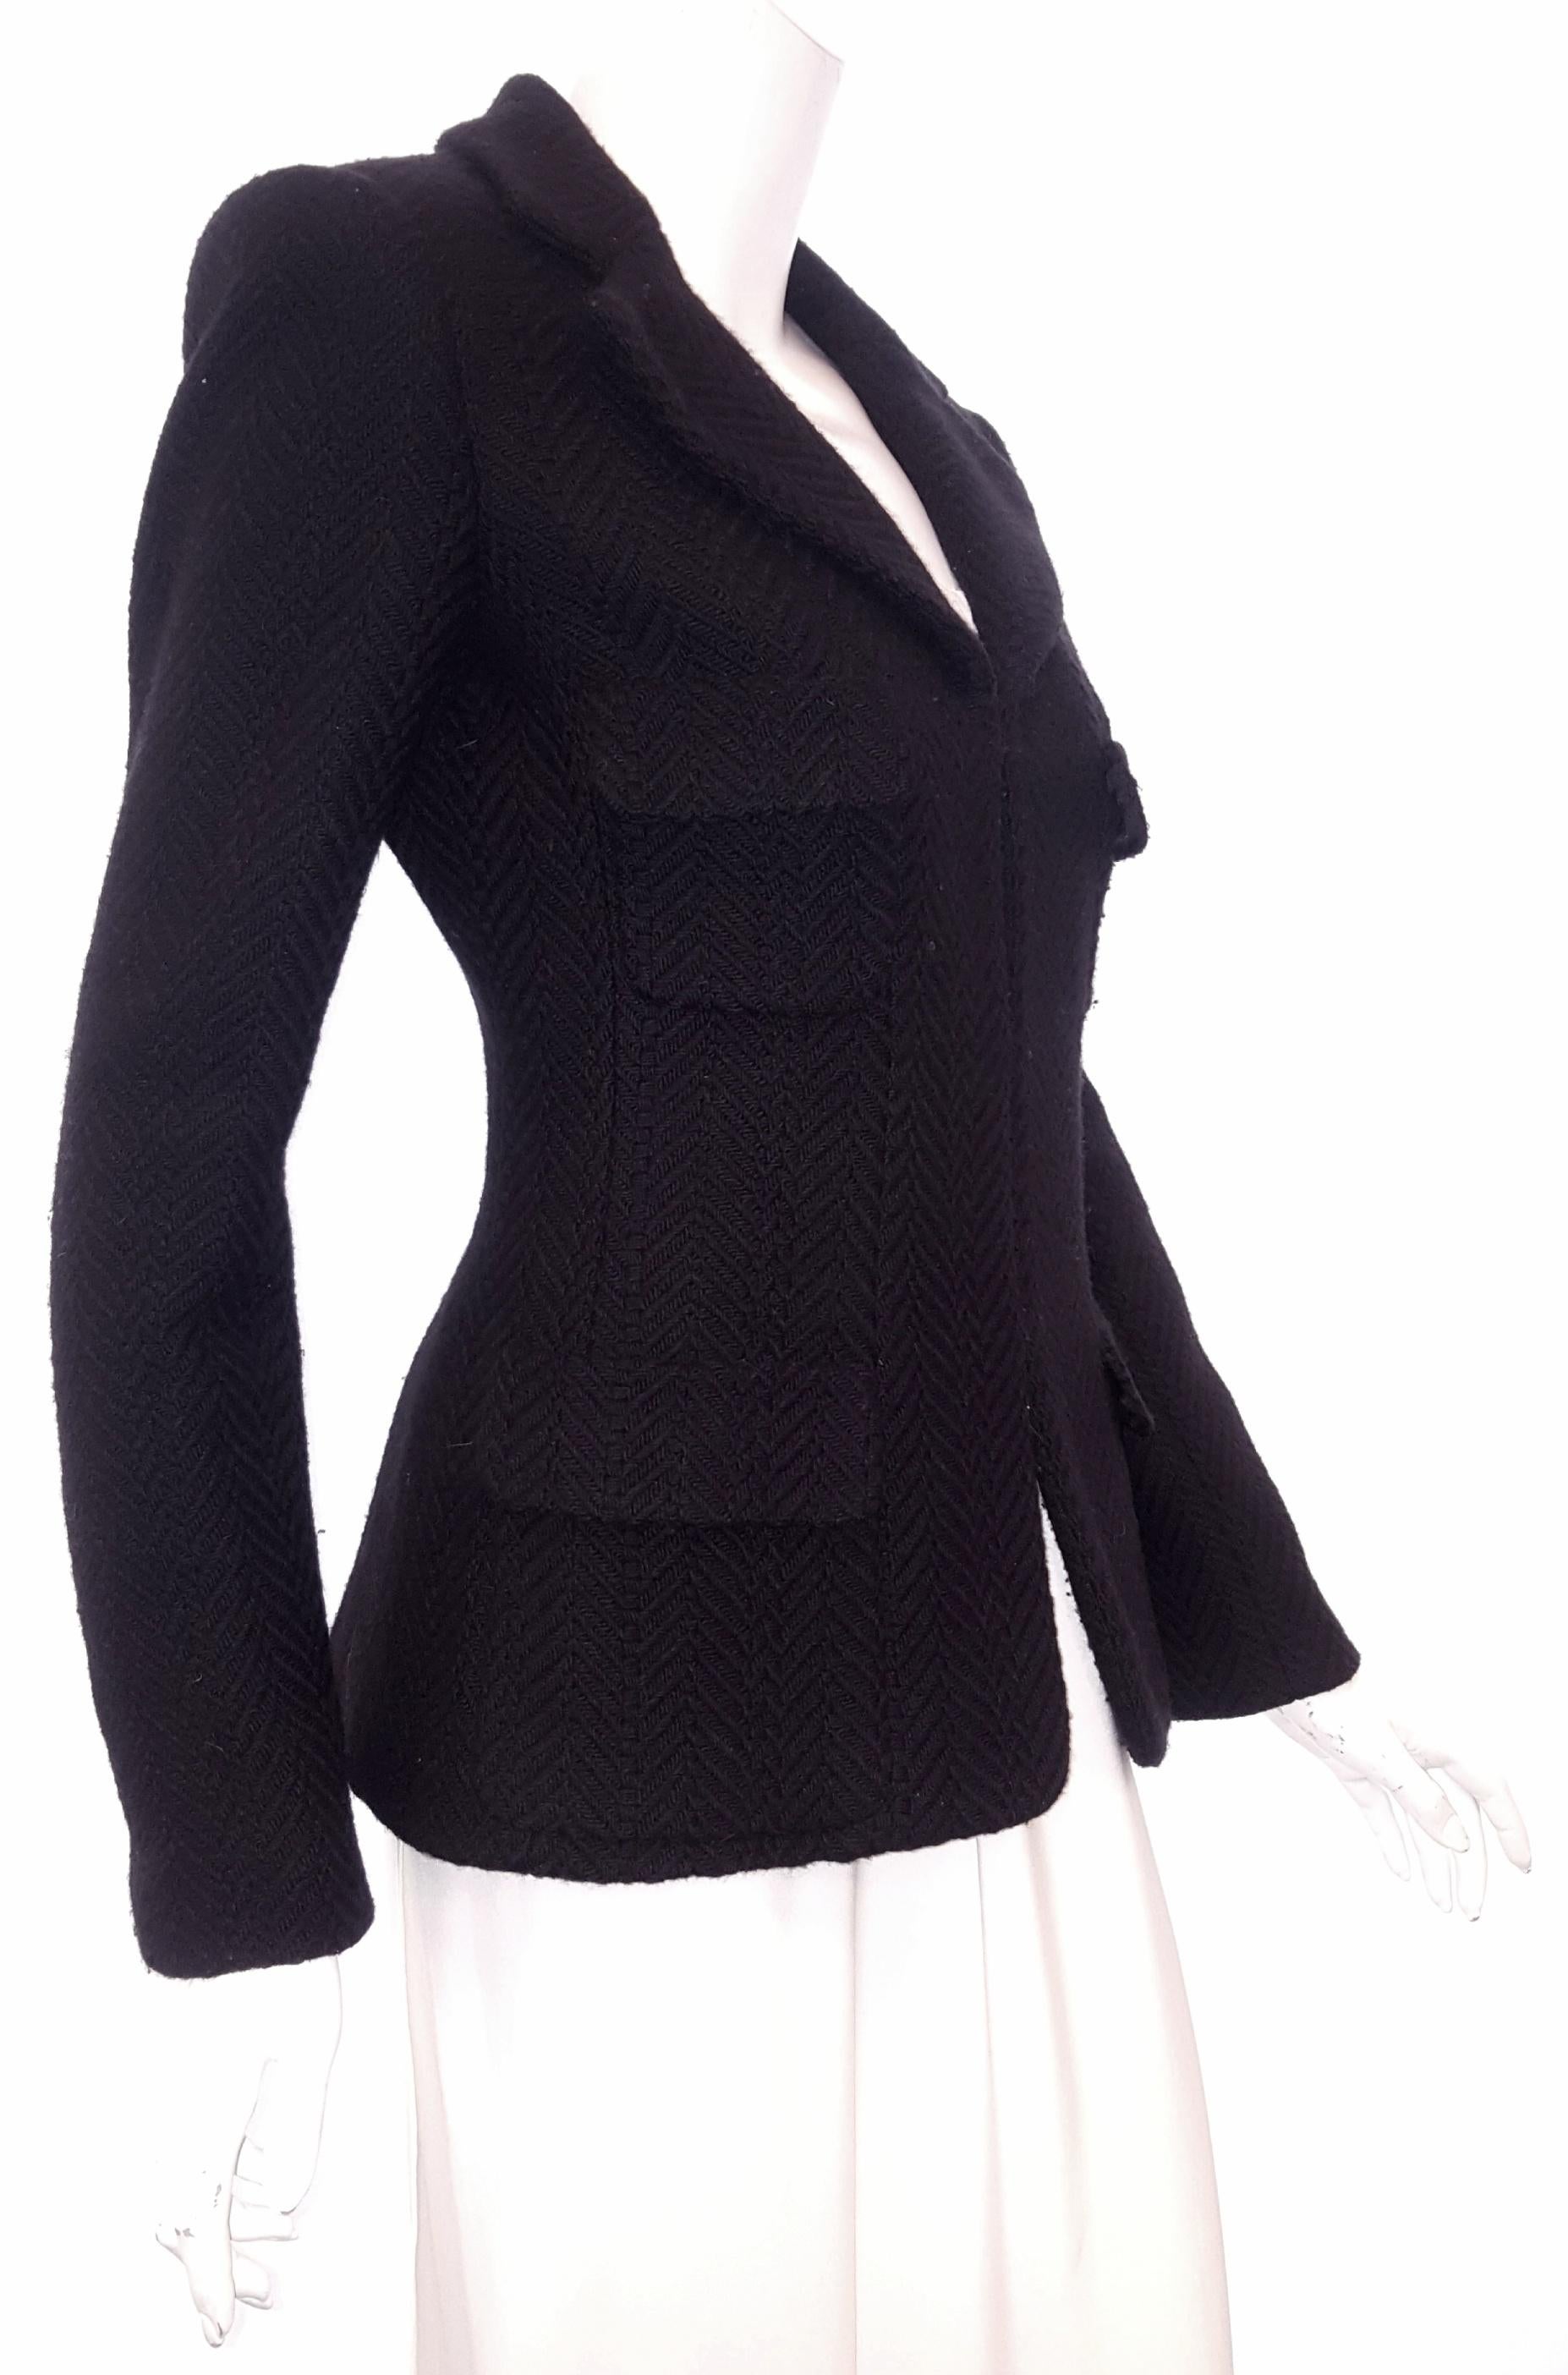 Chanel black wool 2006 Fall Collection classic Chanel herringbone woven tweed jacket incorporates a notch collar.  With four flap pockets at front, and padded shoulders, this jacket is a little bit retro.  Three black buttons, each with a silvertone